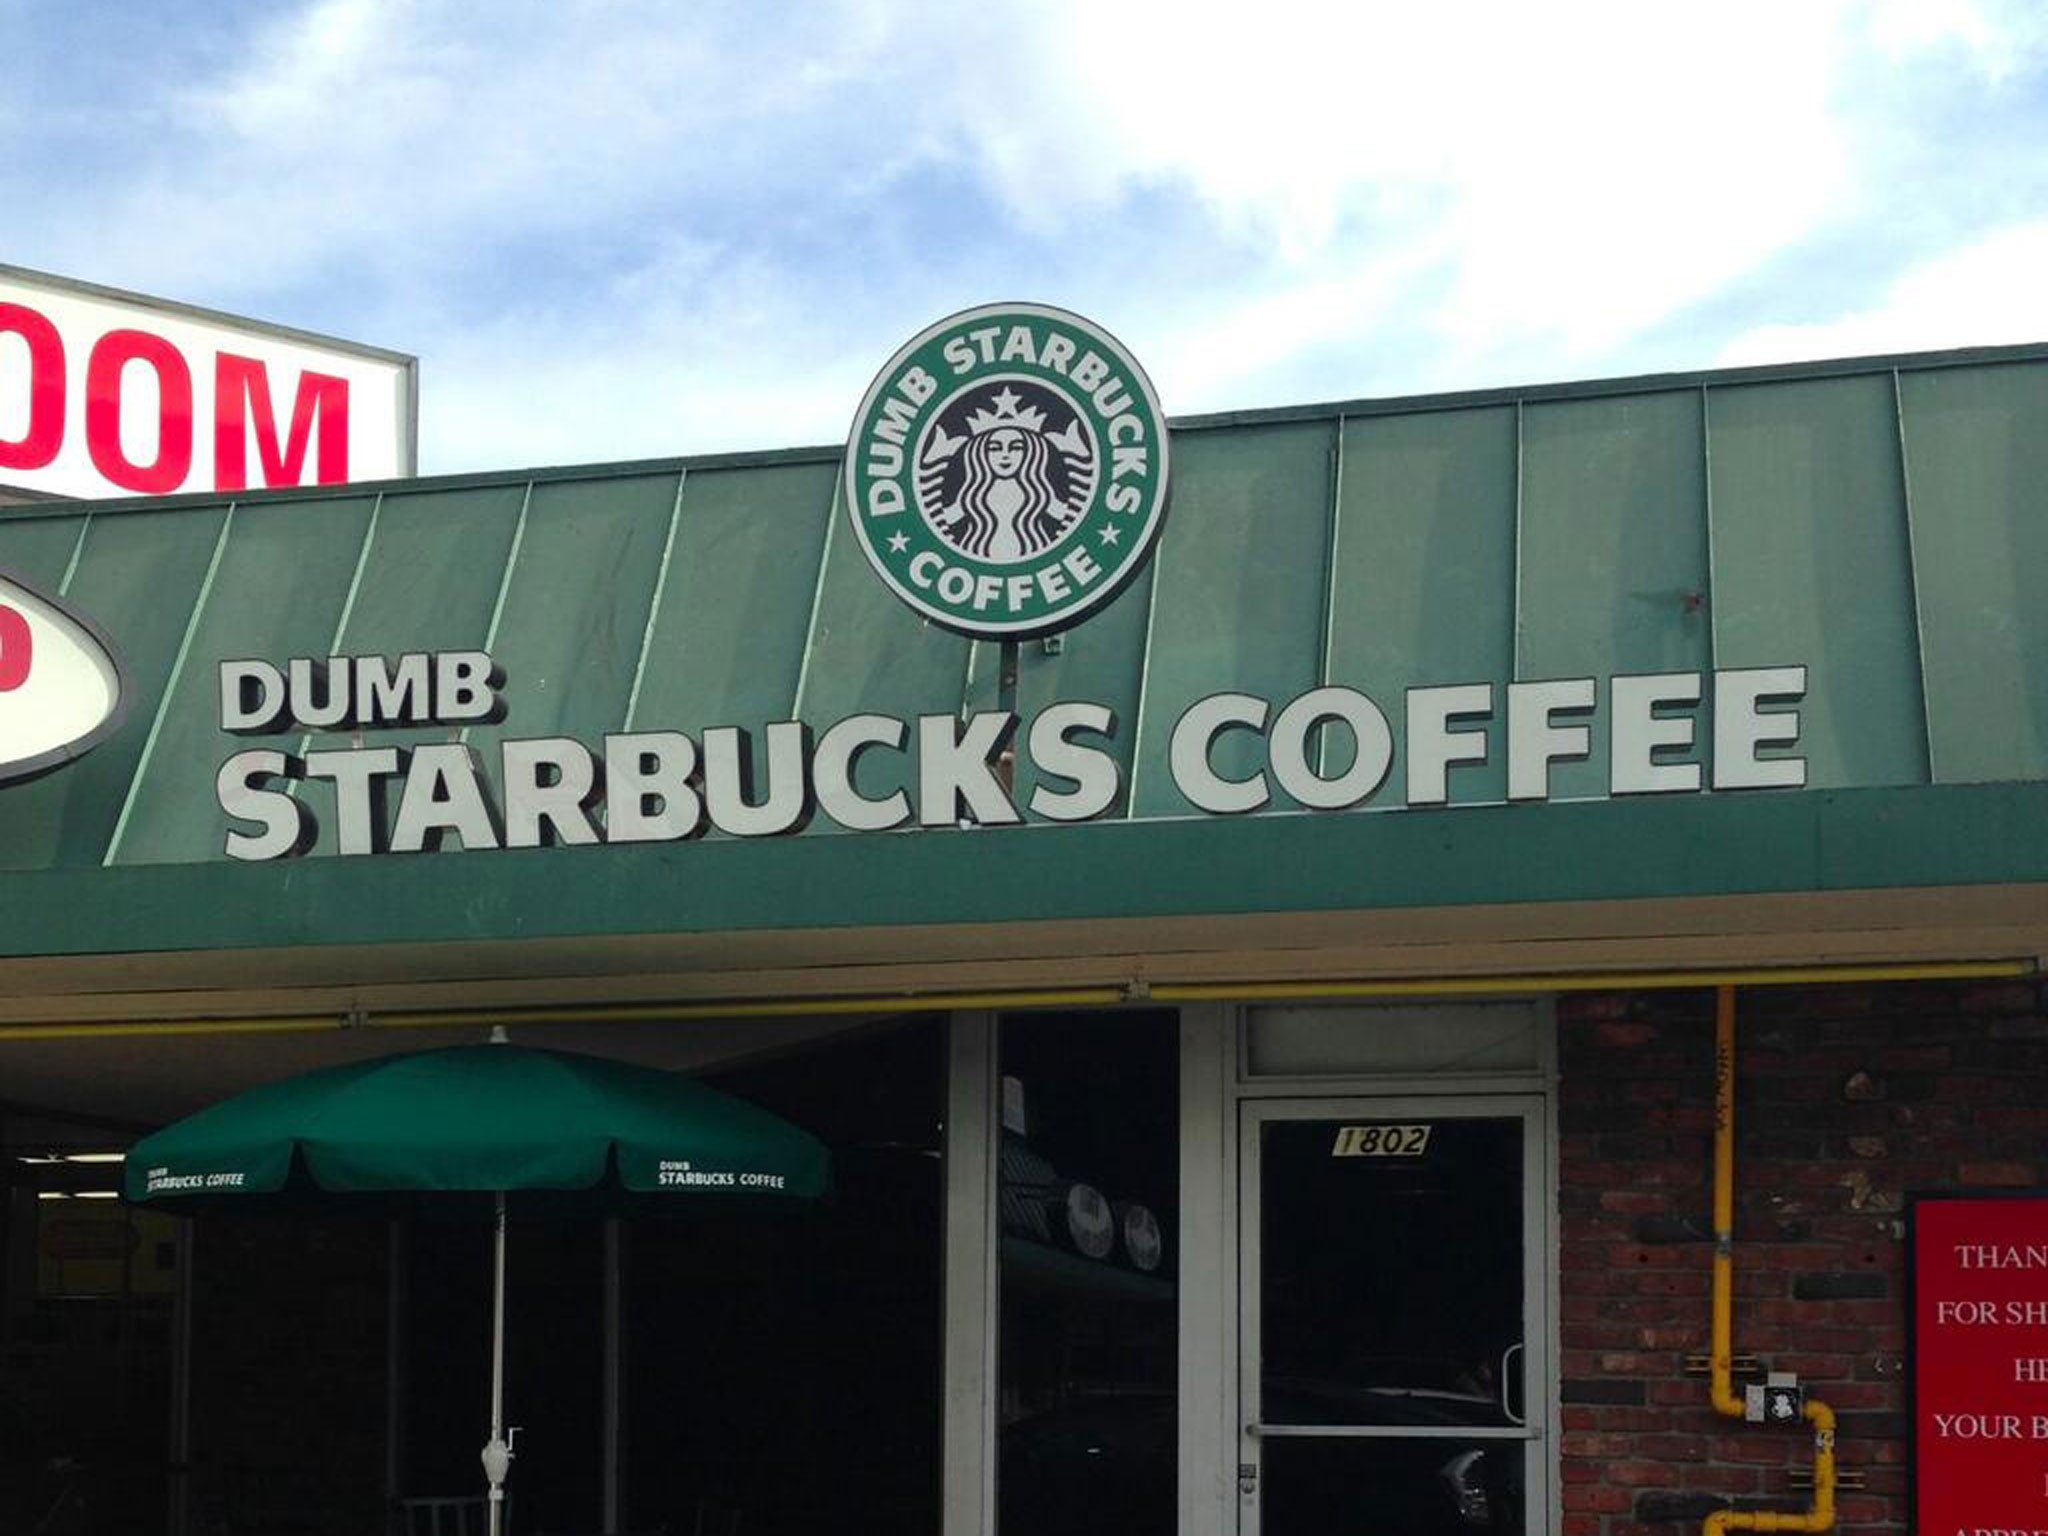 The 'Dumb Starbucks' Twitter feed has already attracted thousands of followers - but will the store be around for long?